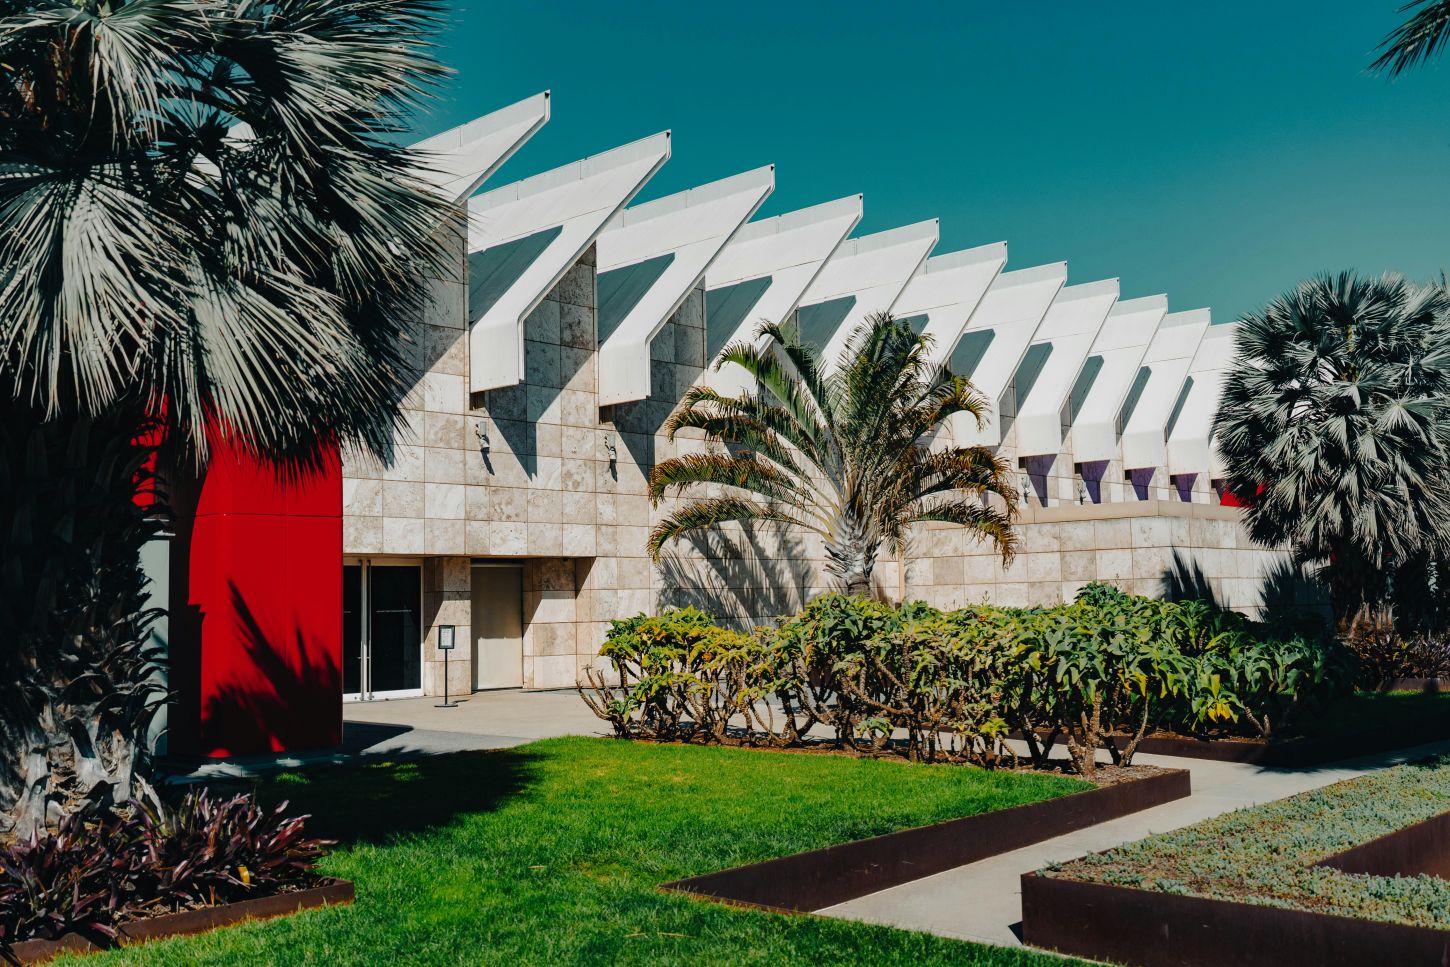 Los Angeles County Museum of Art